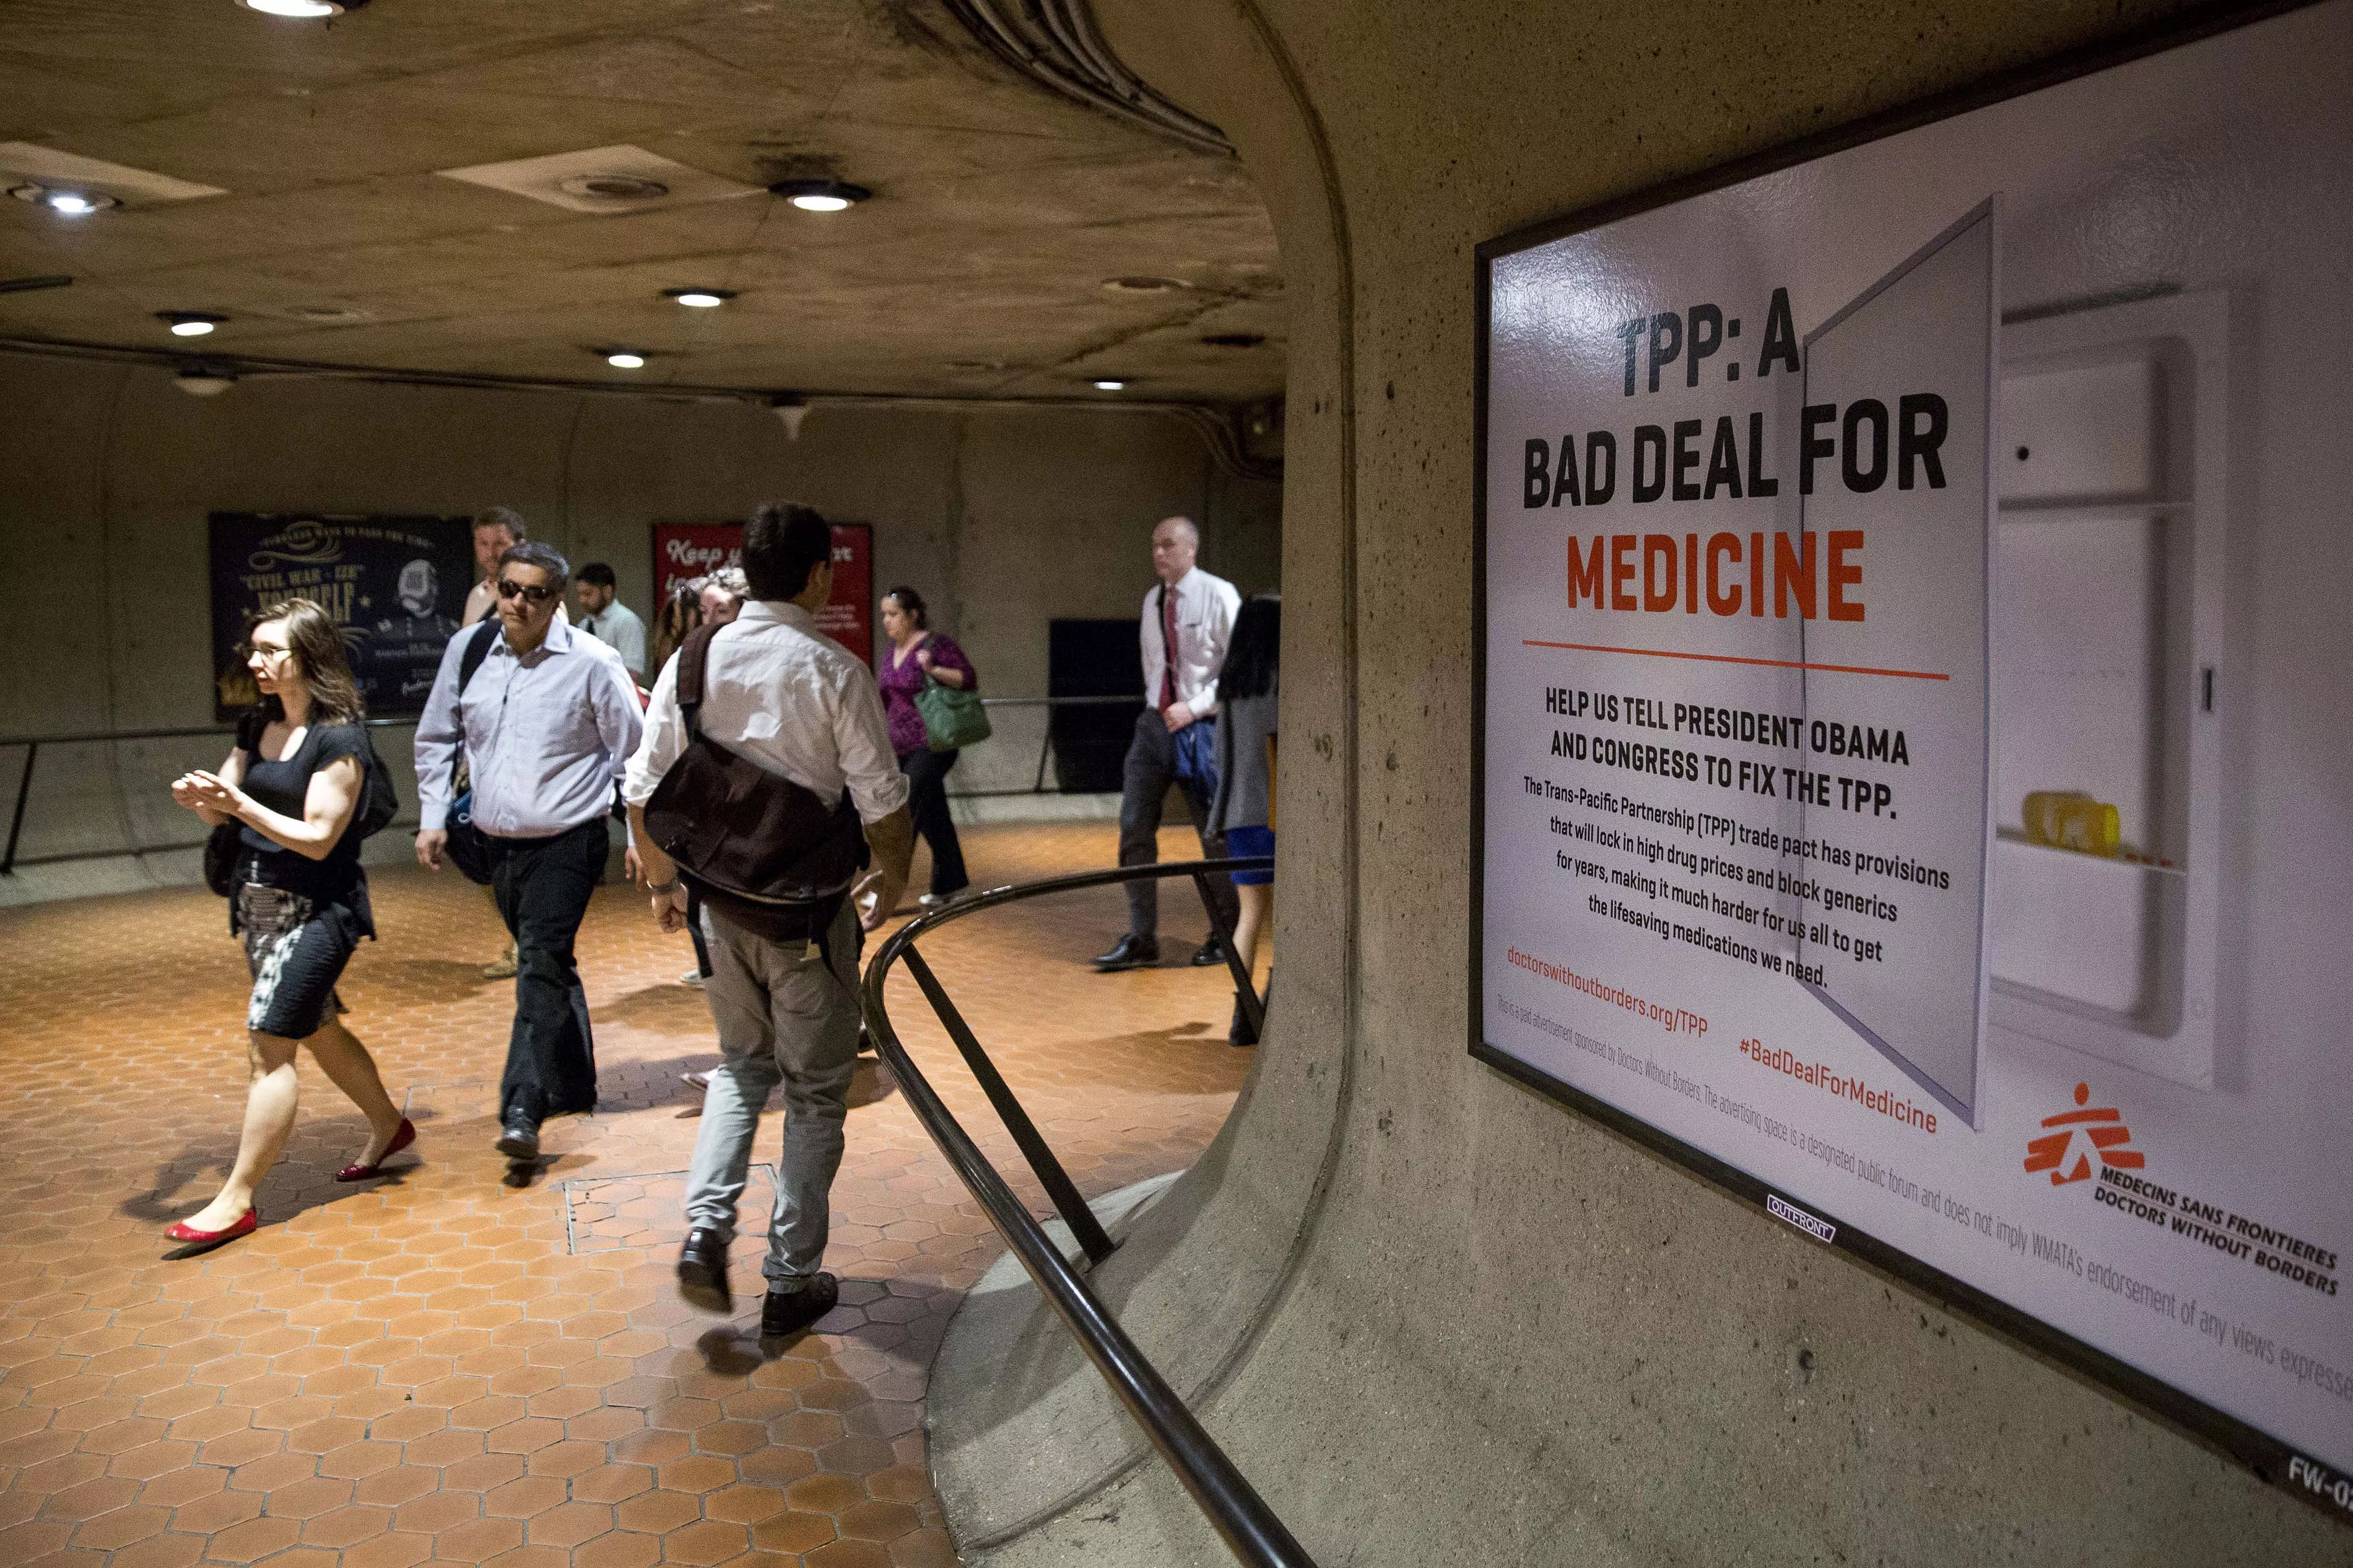 Metro advertisements for Doctors Without Borders, 2015.